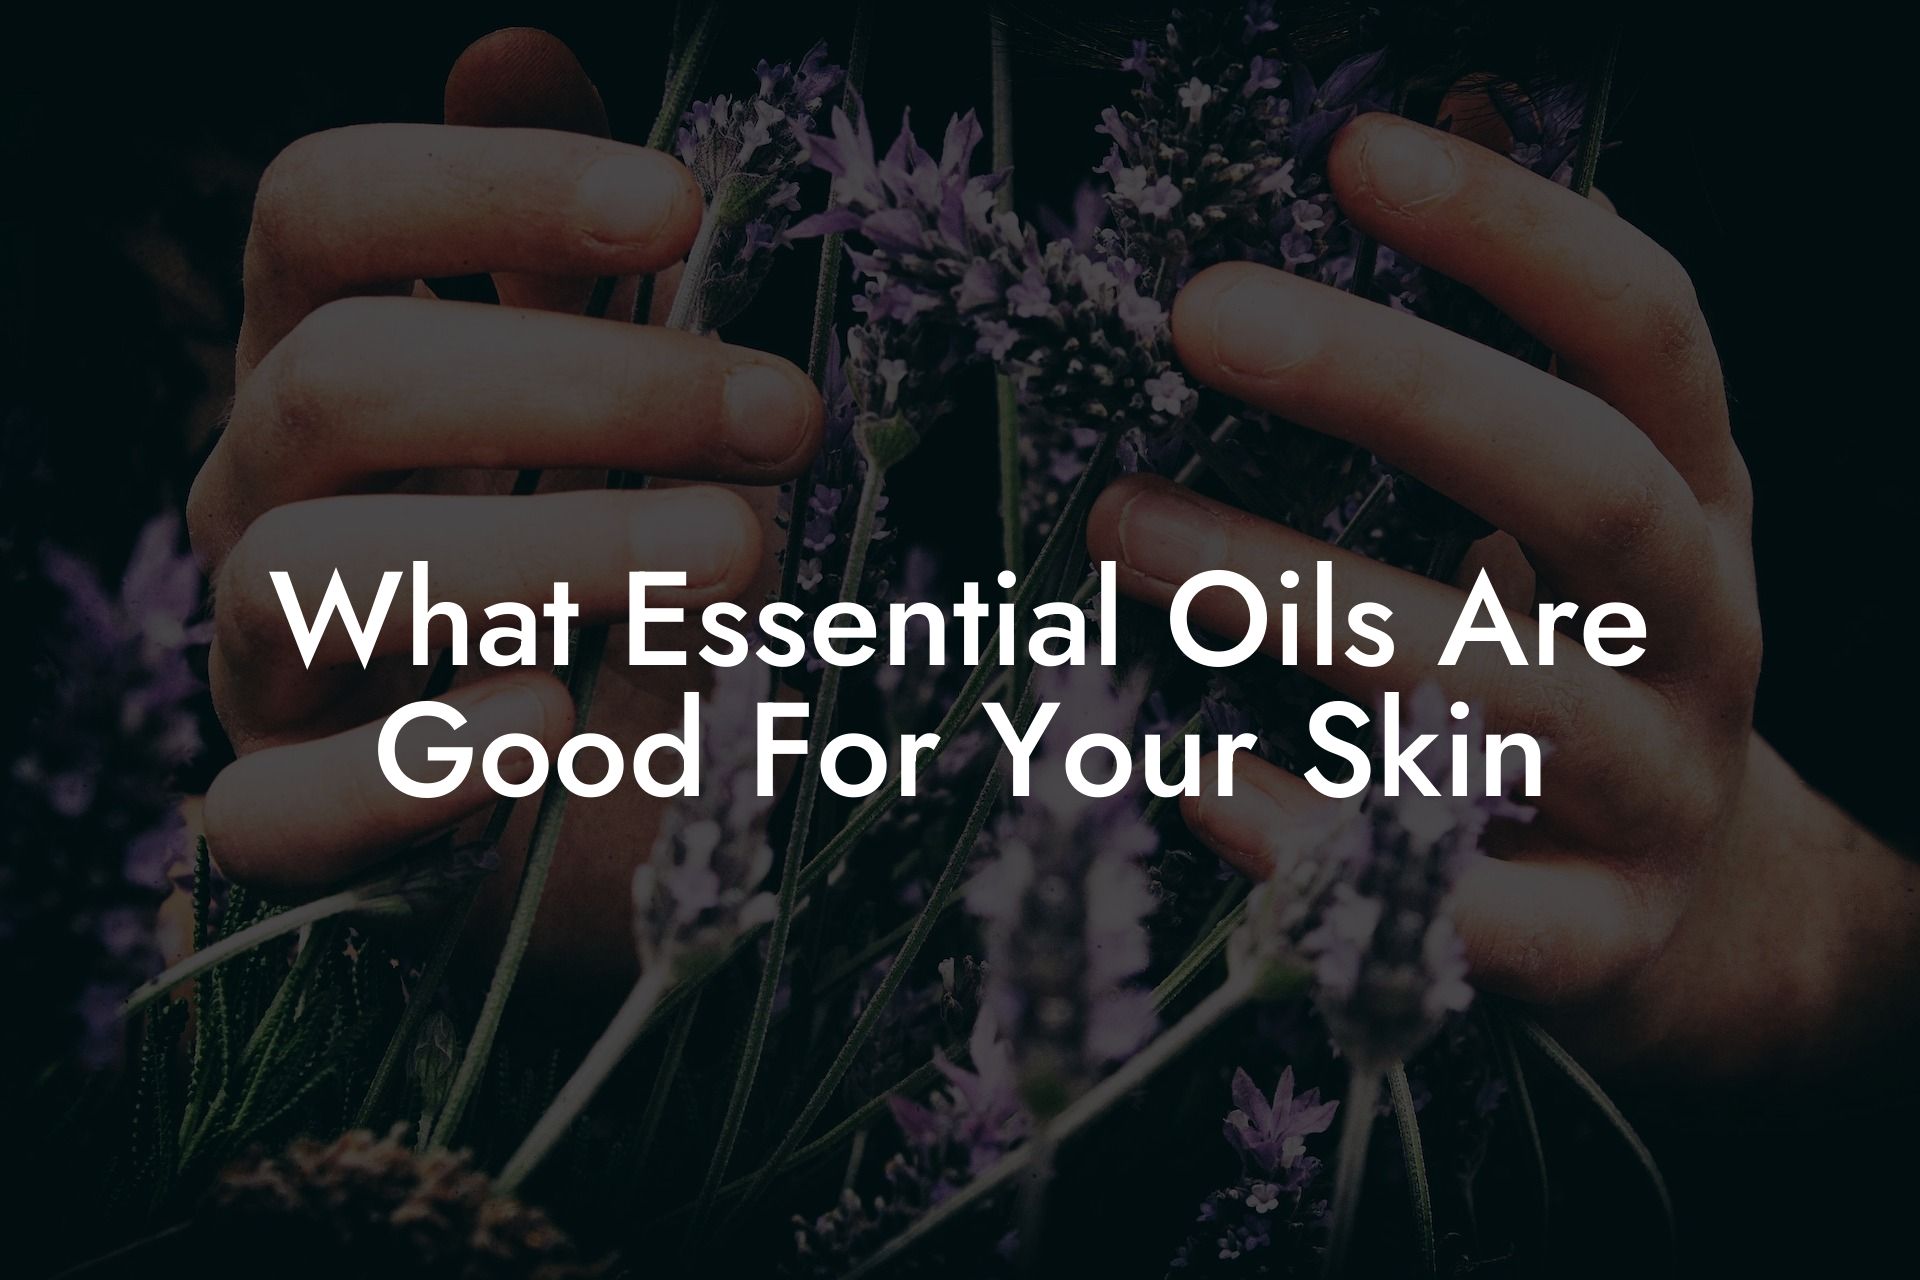 What Essential Oils Are Good For Your Skin